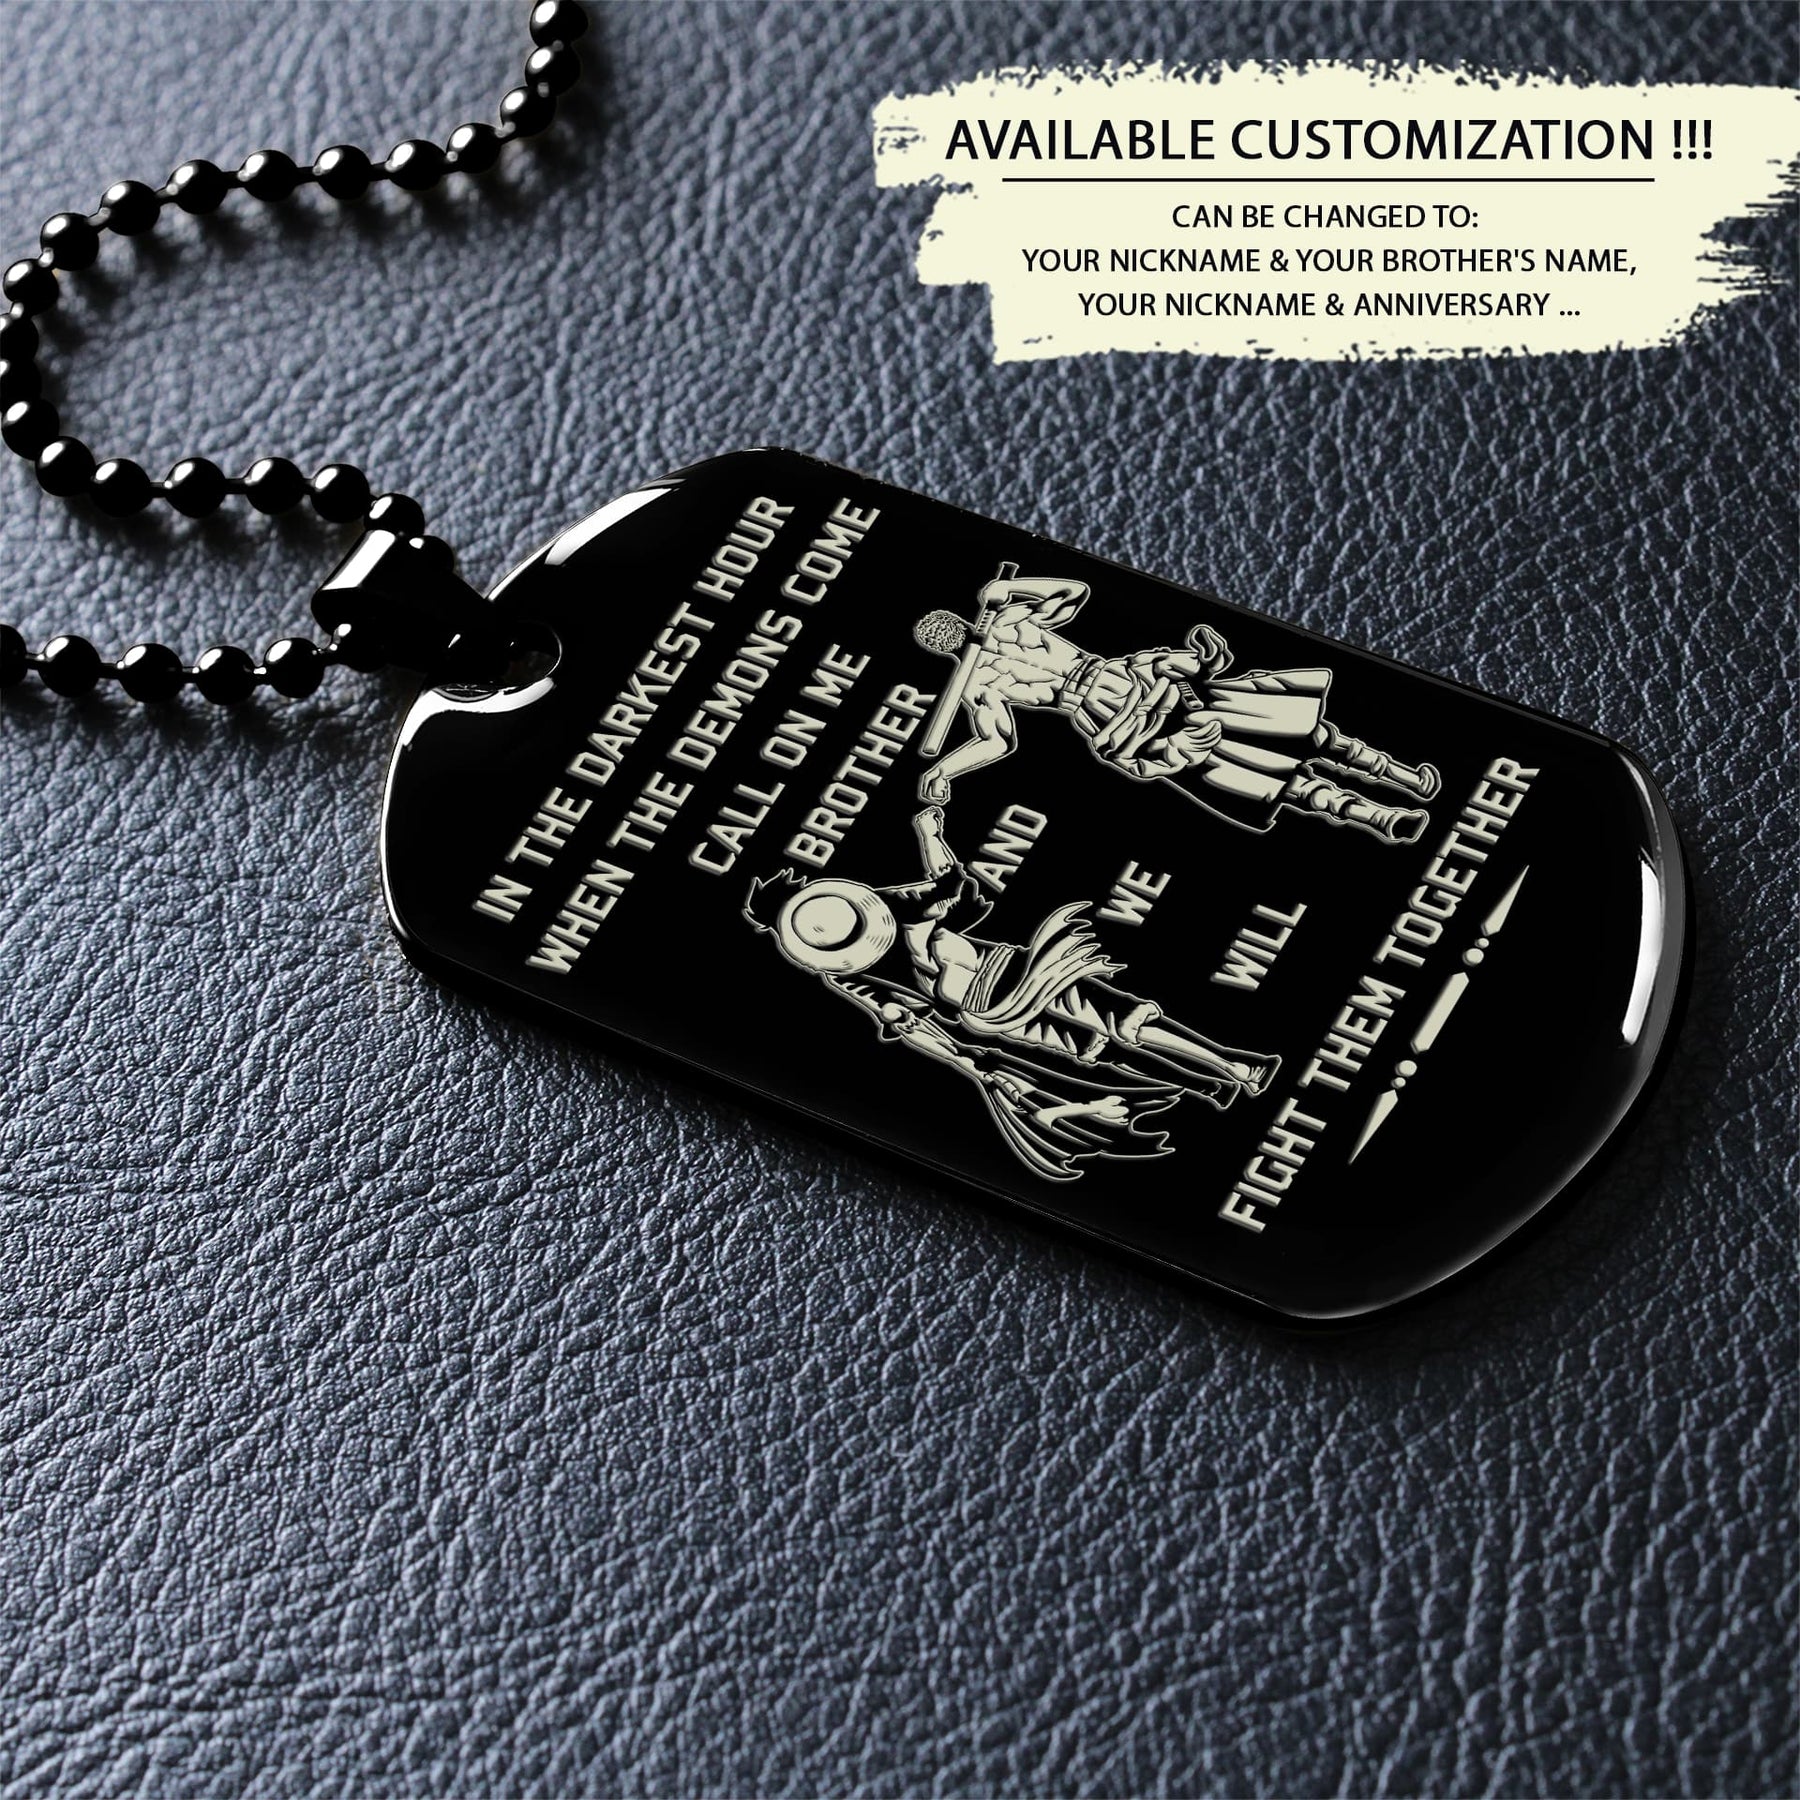 OPD010 - Call On me Brother - Monkey D. Luffy - Roronoa Zoro - One Piece Dog Tag - Engrave Black Dog Tag